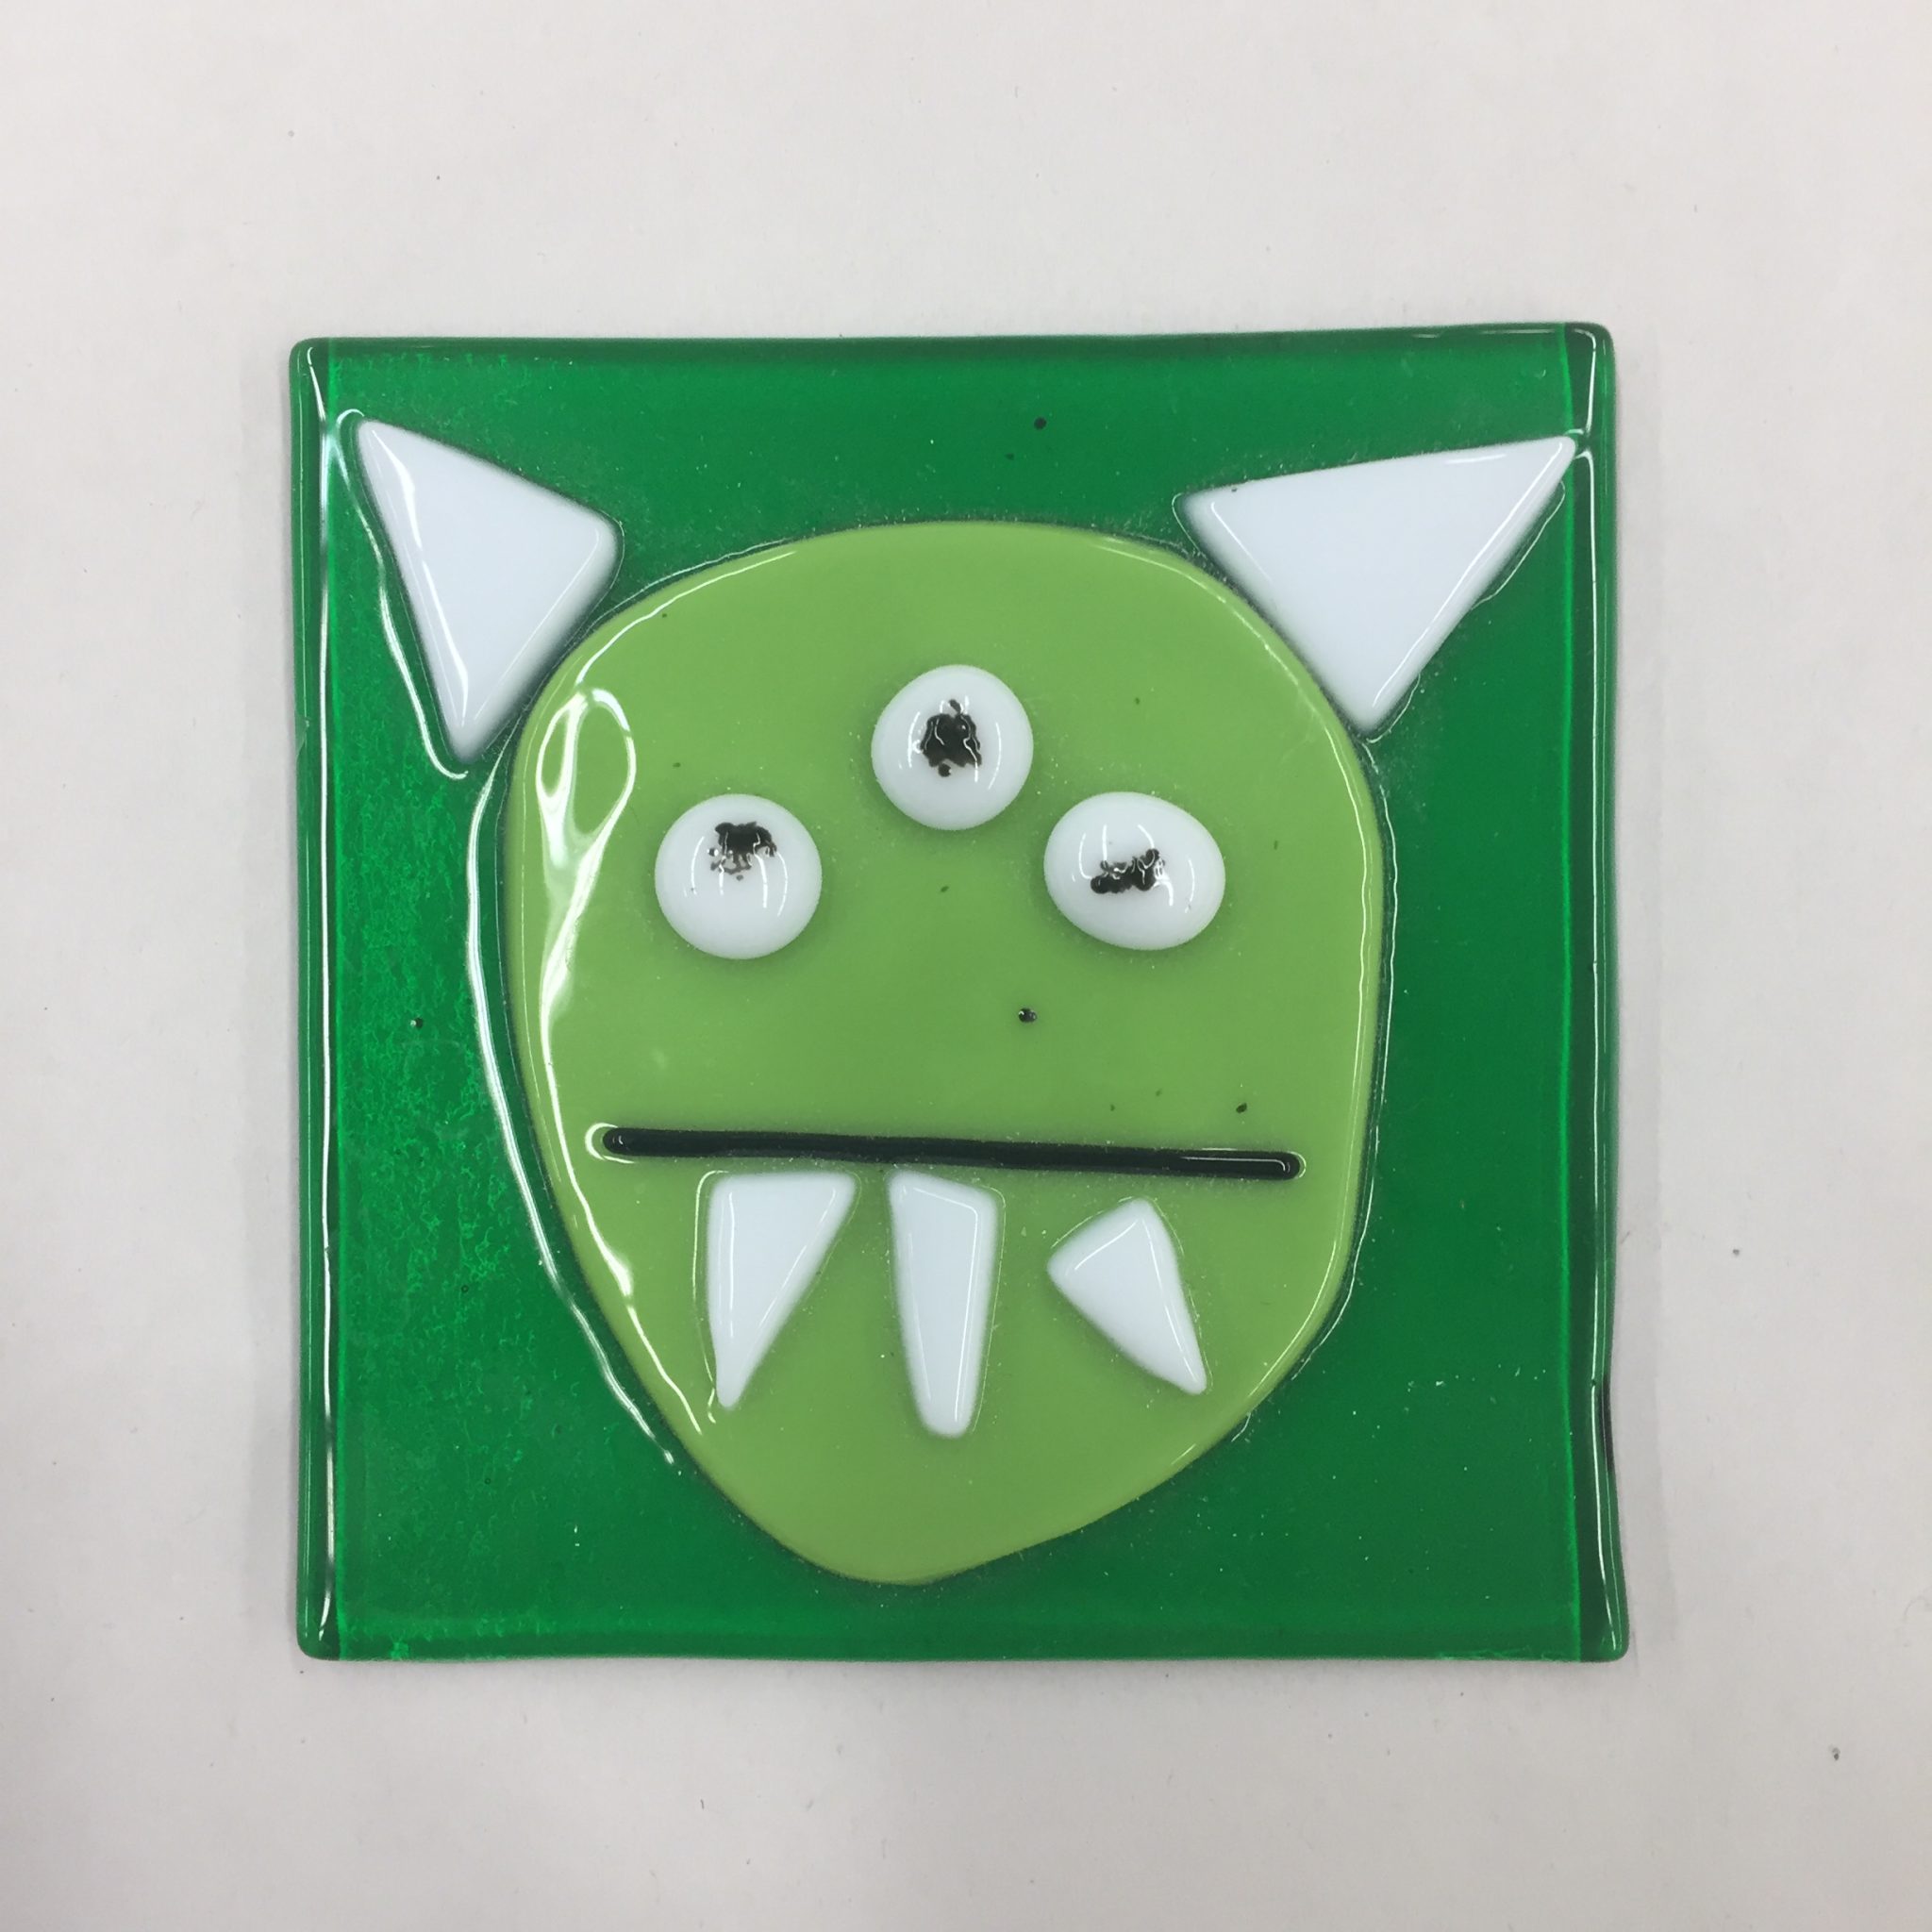 Vernon Community Arts Centre - Fused Glass Monster Tiles for Ages 6 to 106